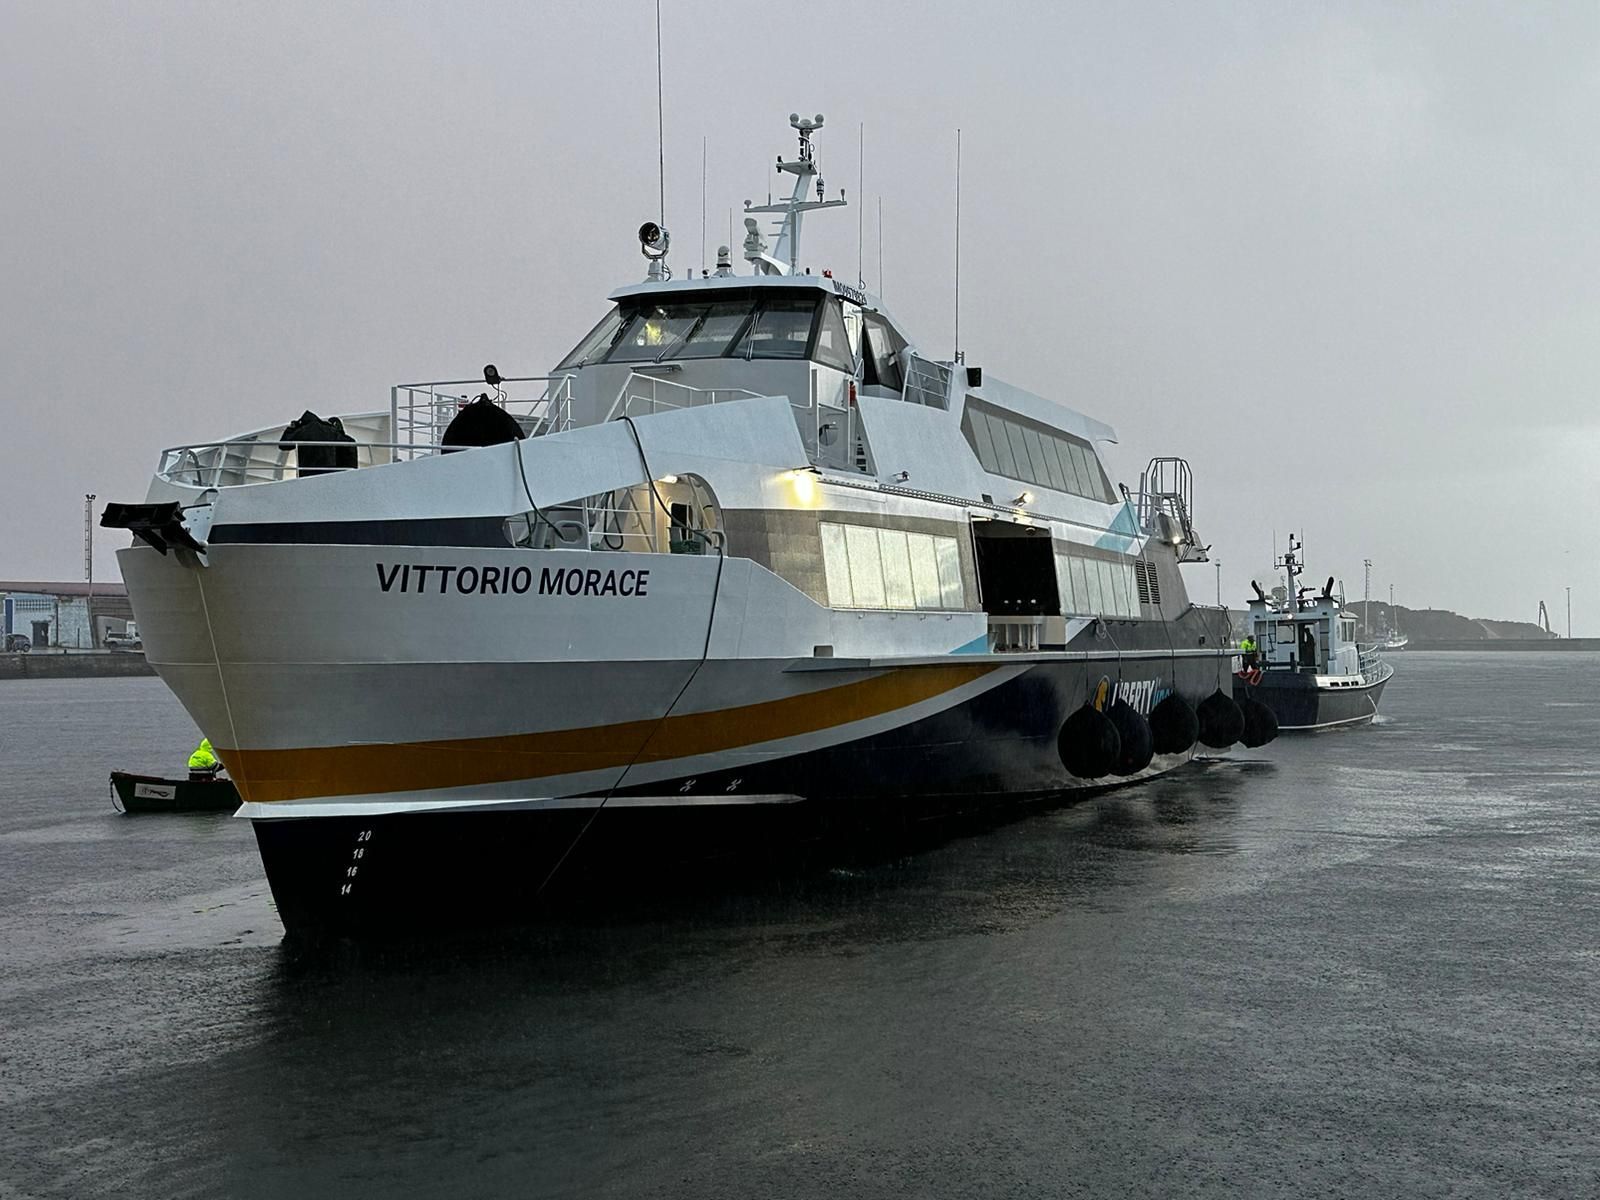 Liberty Lines confirms launching of first of 12 new hybrid fast ferries